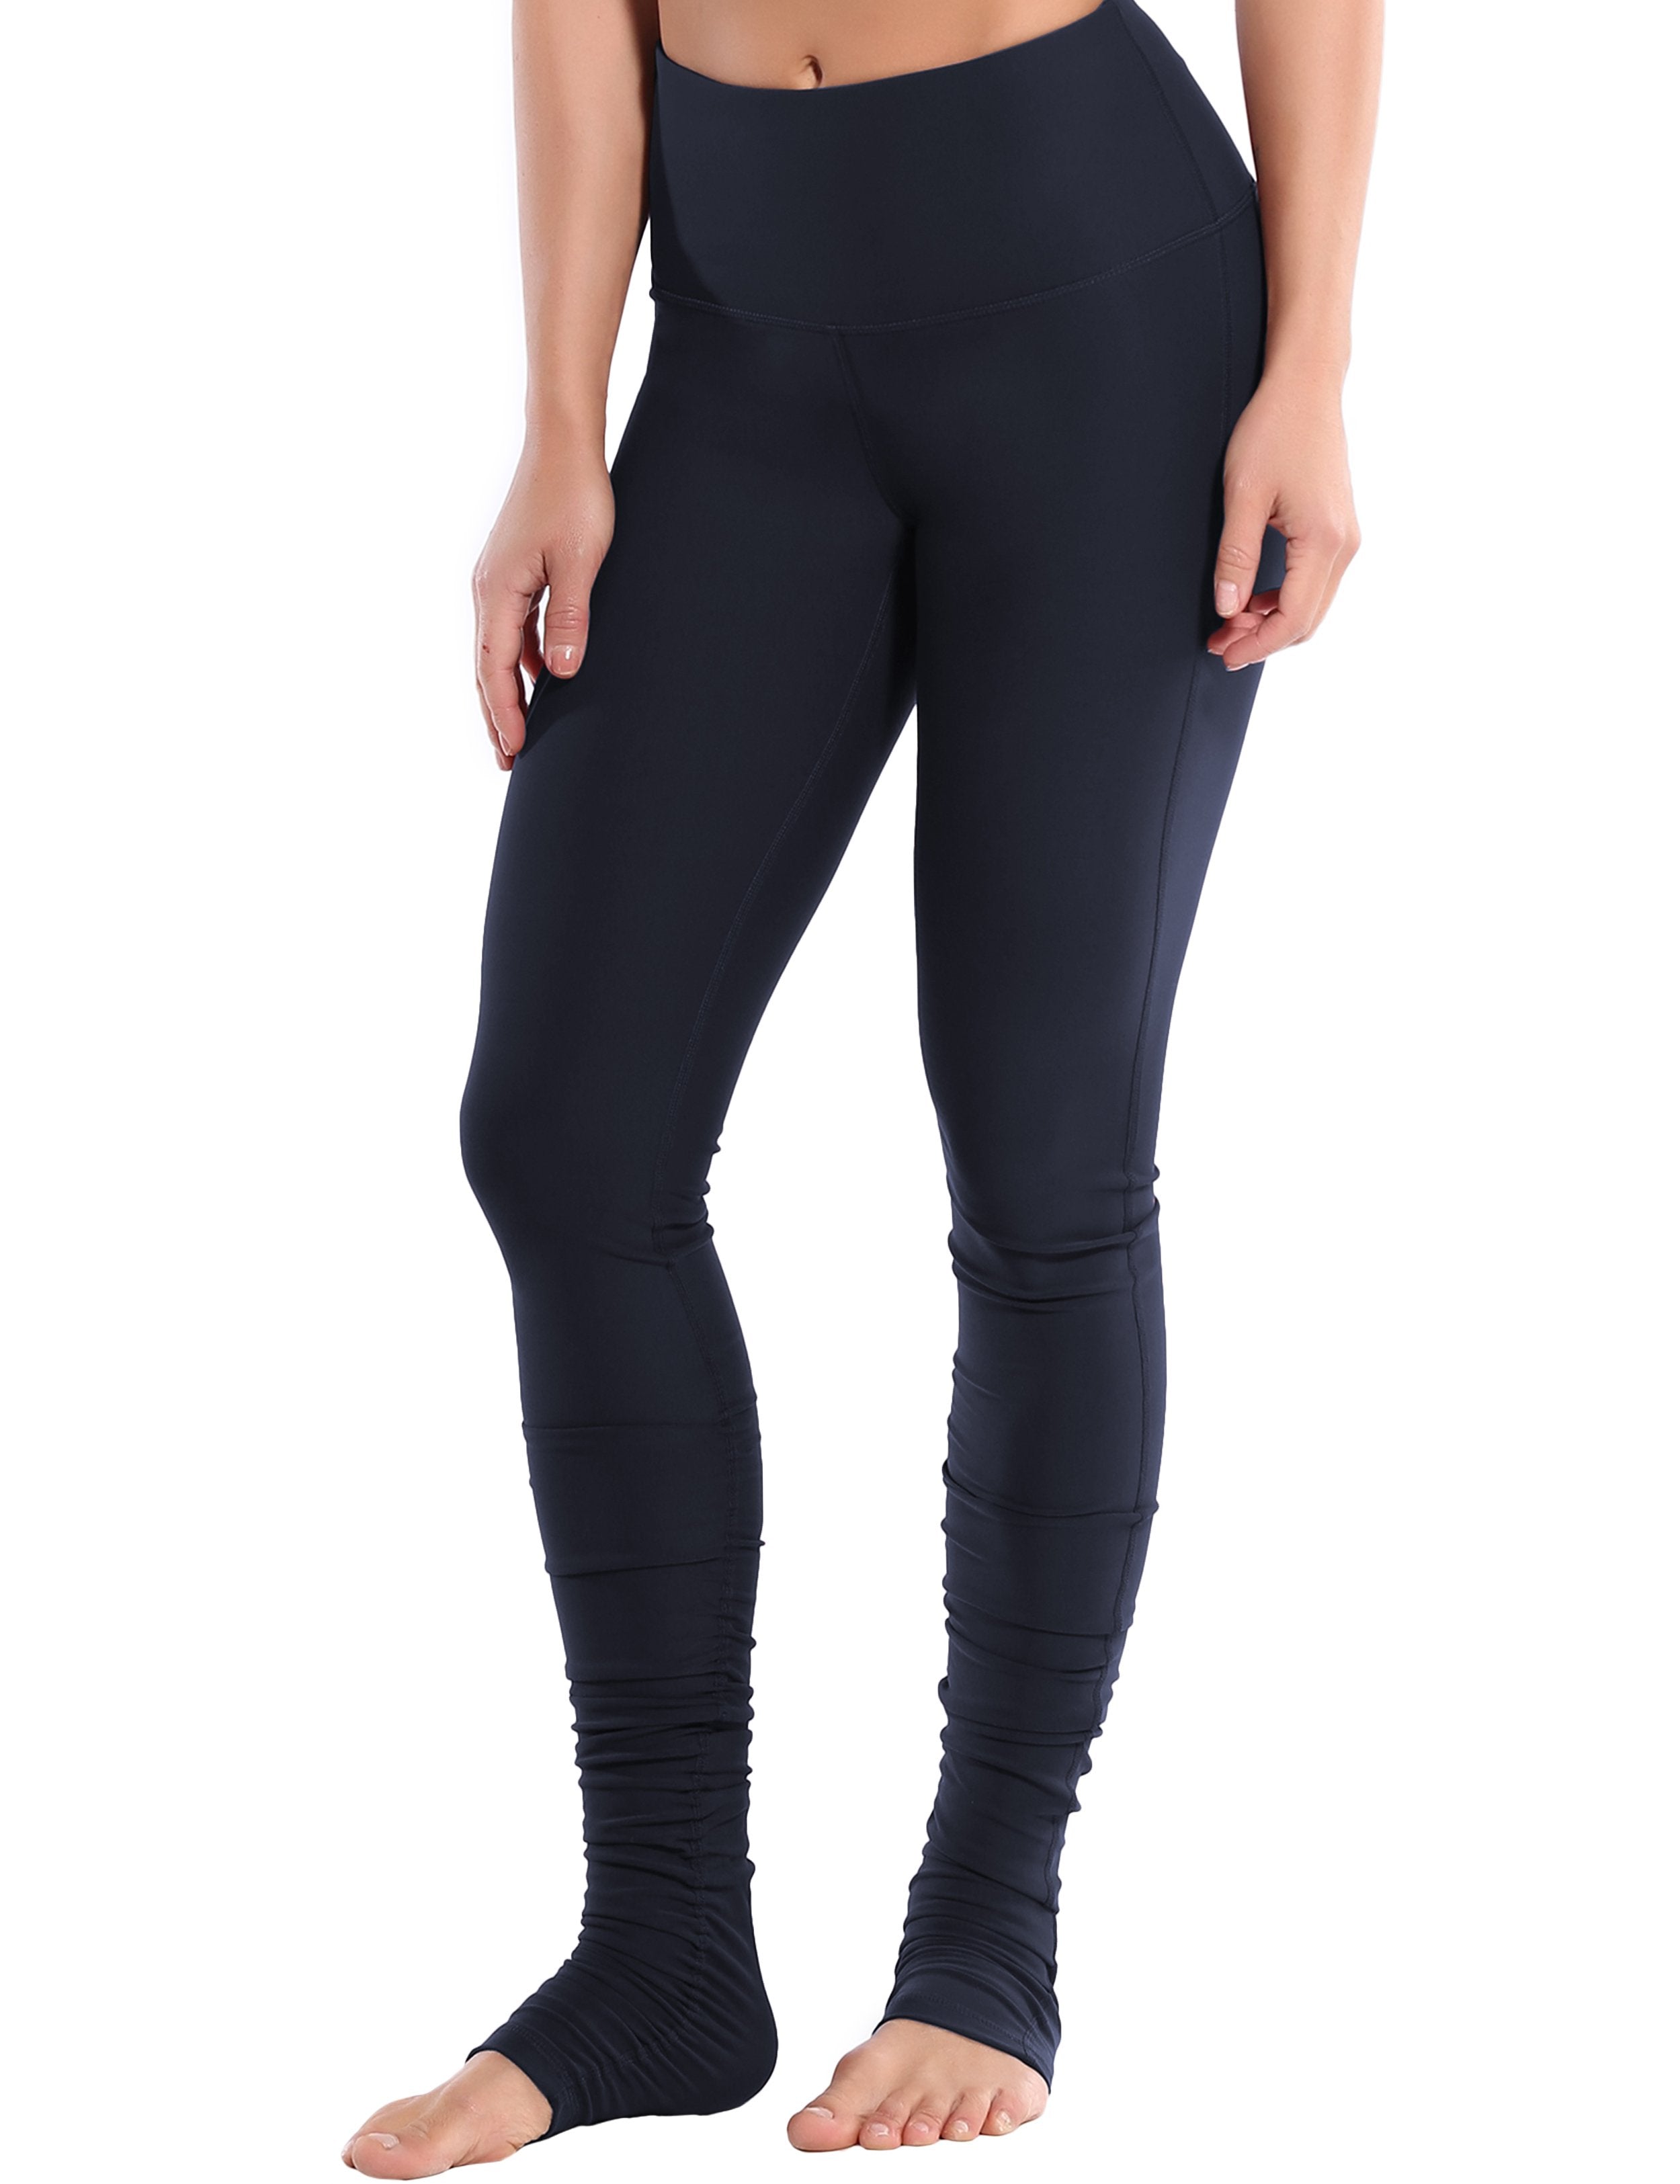 Over the Heel Golf Pants darknavy Over the Heel Design 87%Nylon/13%Spandex Fabric doesn't attract lint easily 4-way stretch No see-through Moisture-wicking Tummy control